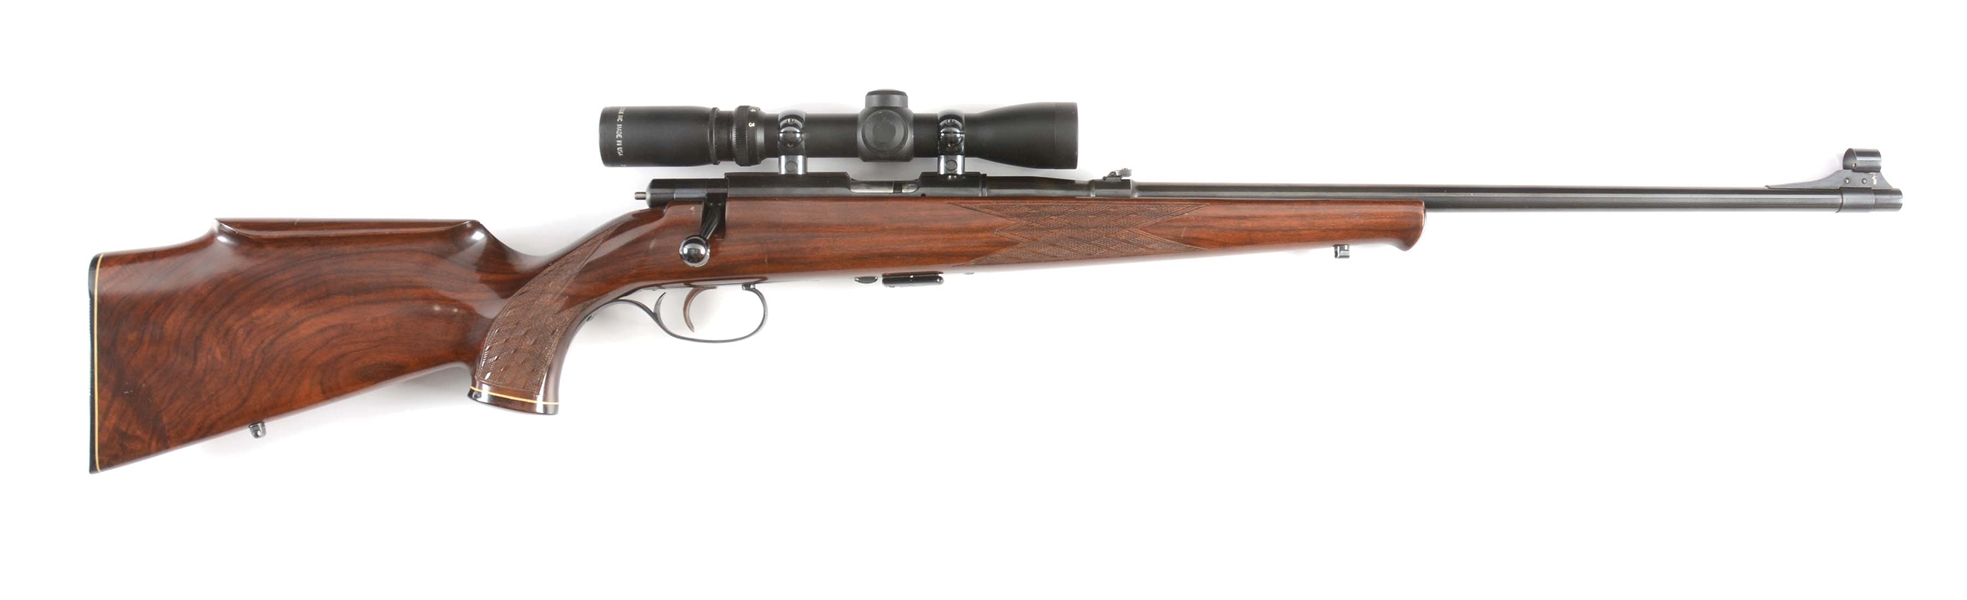 (M) ANSCHUTZ-SAVAGE MODEL 54 BOLT ACTION RIFLE WITH SCOPE.